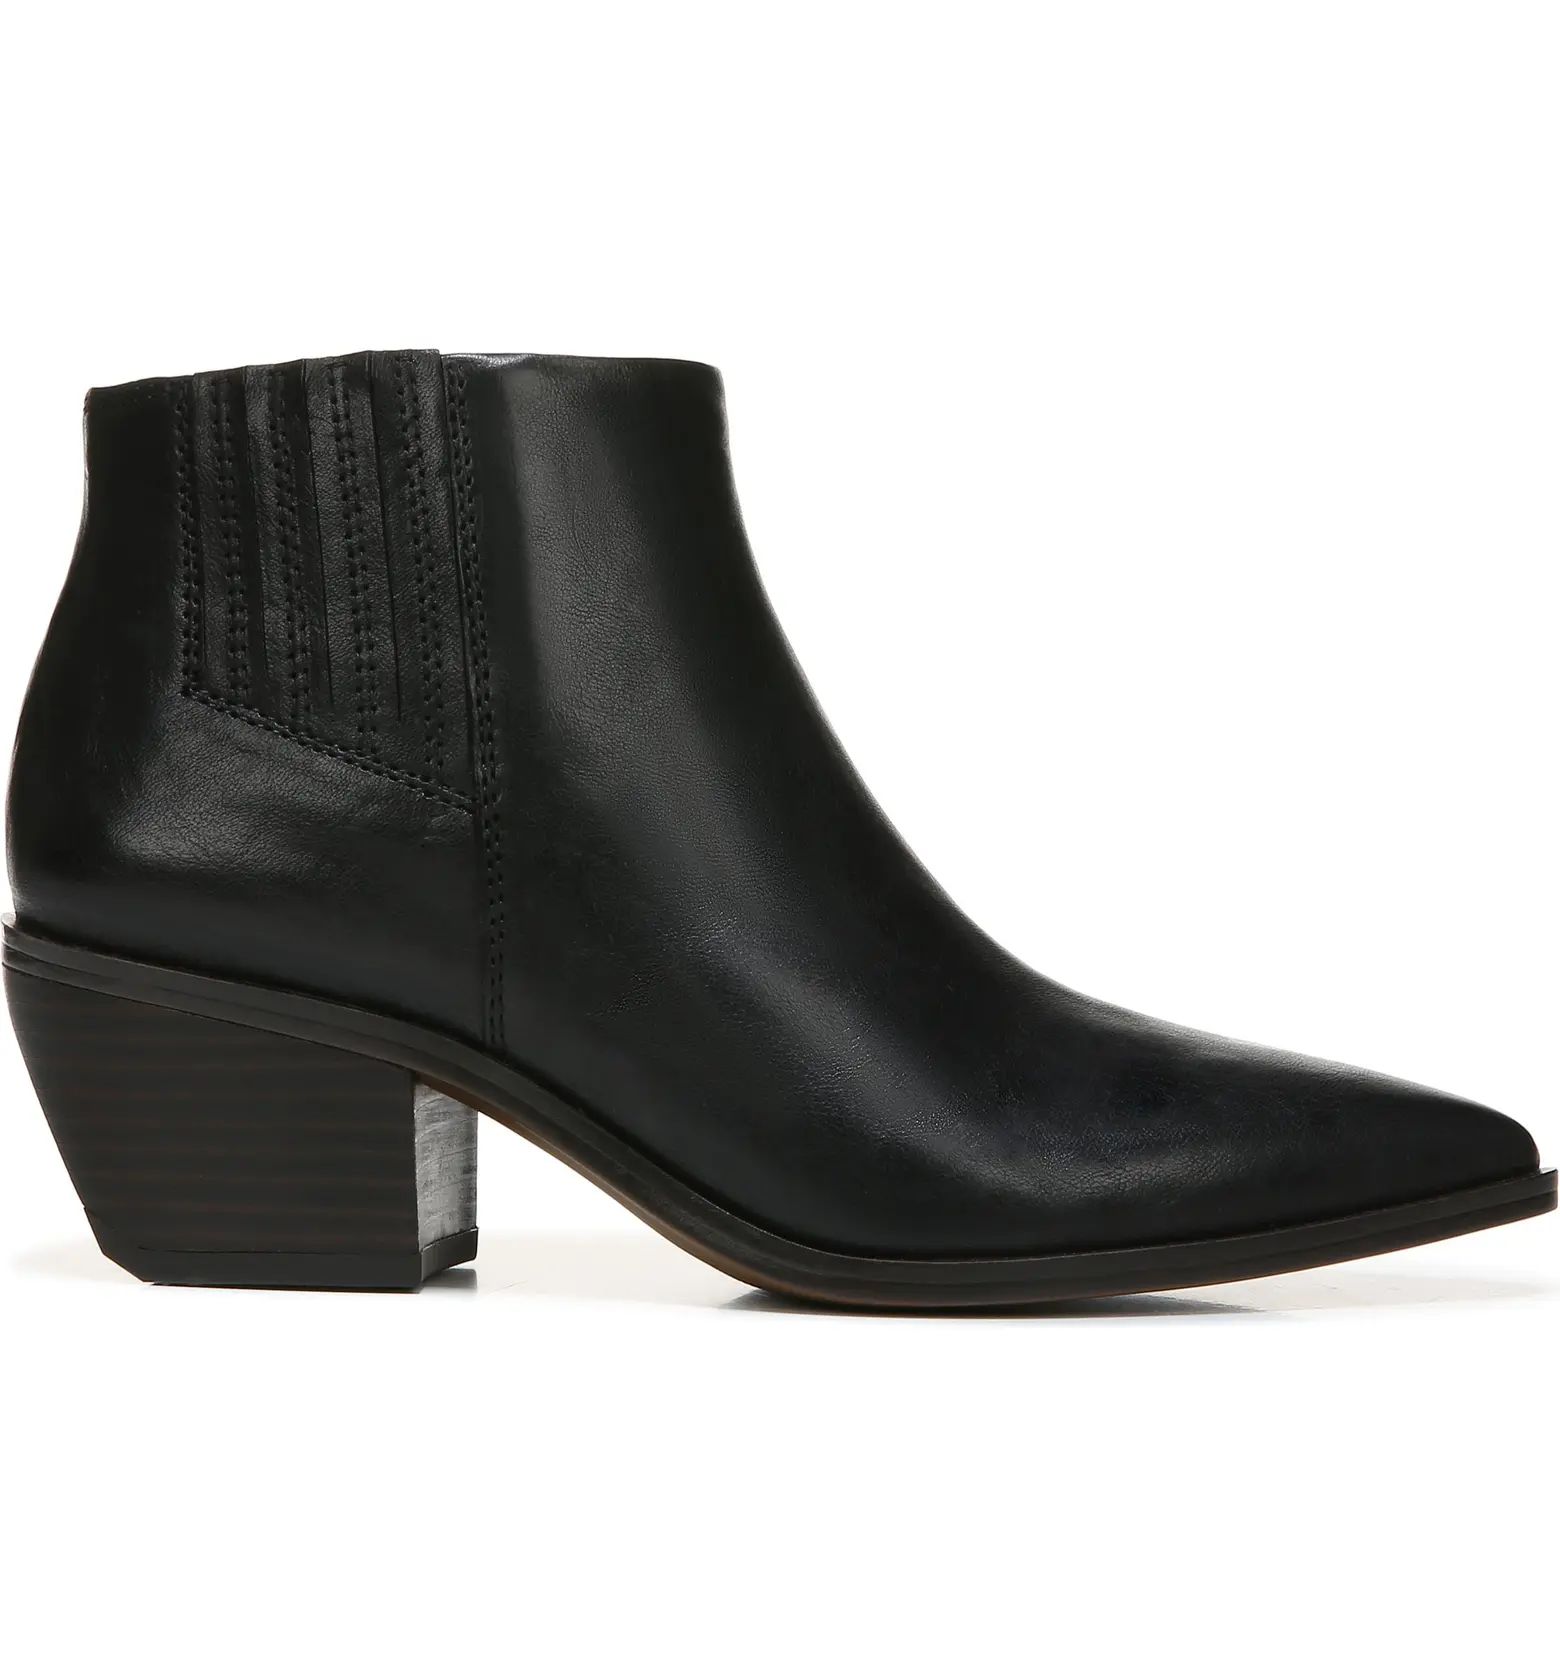 A-Spur Ankle BootSARTO BY FRANCO SARTO | Nordstrom